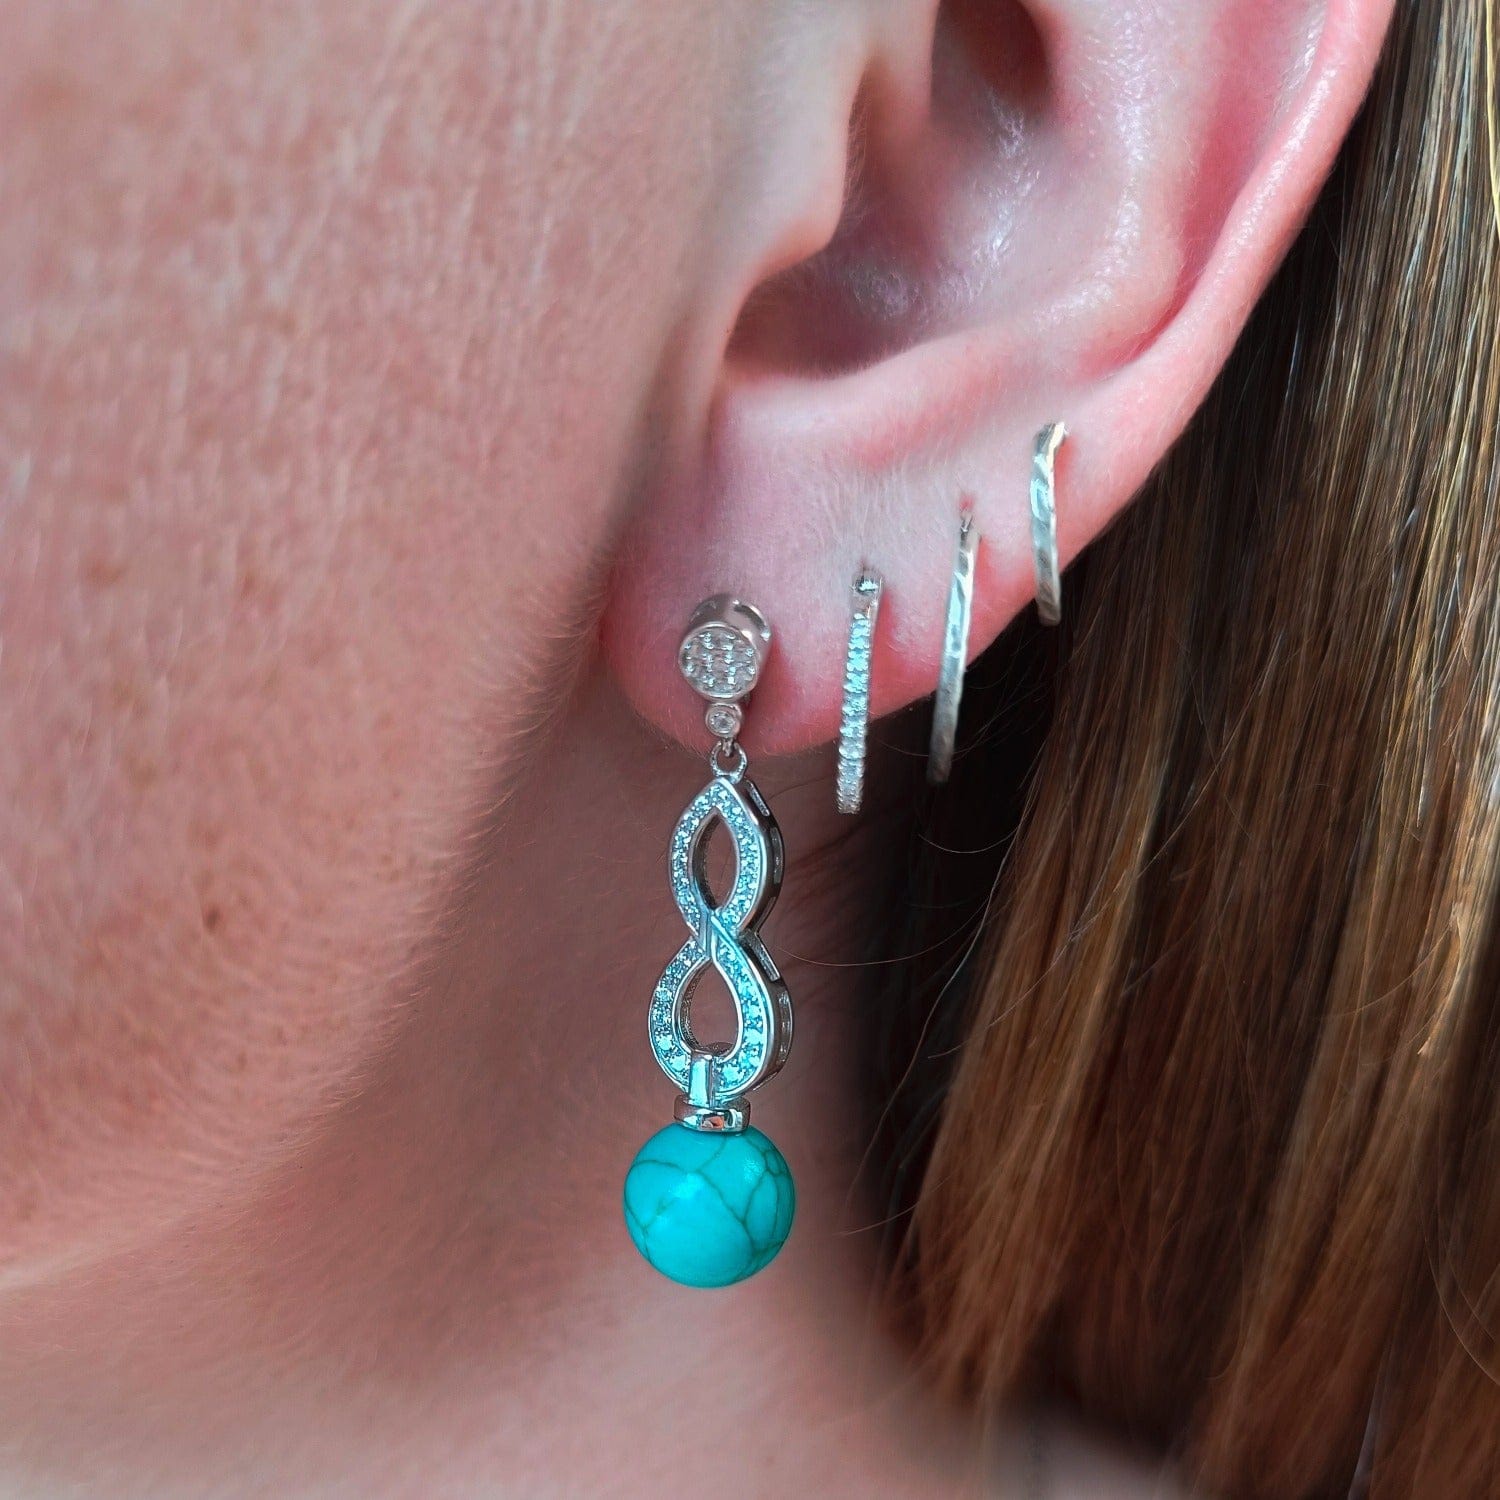 Azure Oceanic Earrings featuring turquoise stones in a sterling silver setting on a models ear natural look